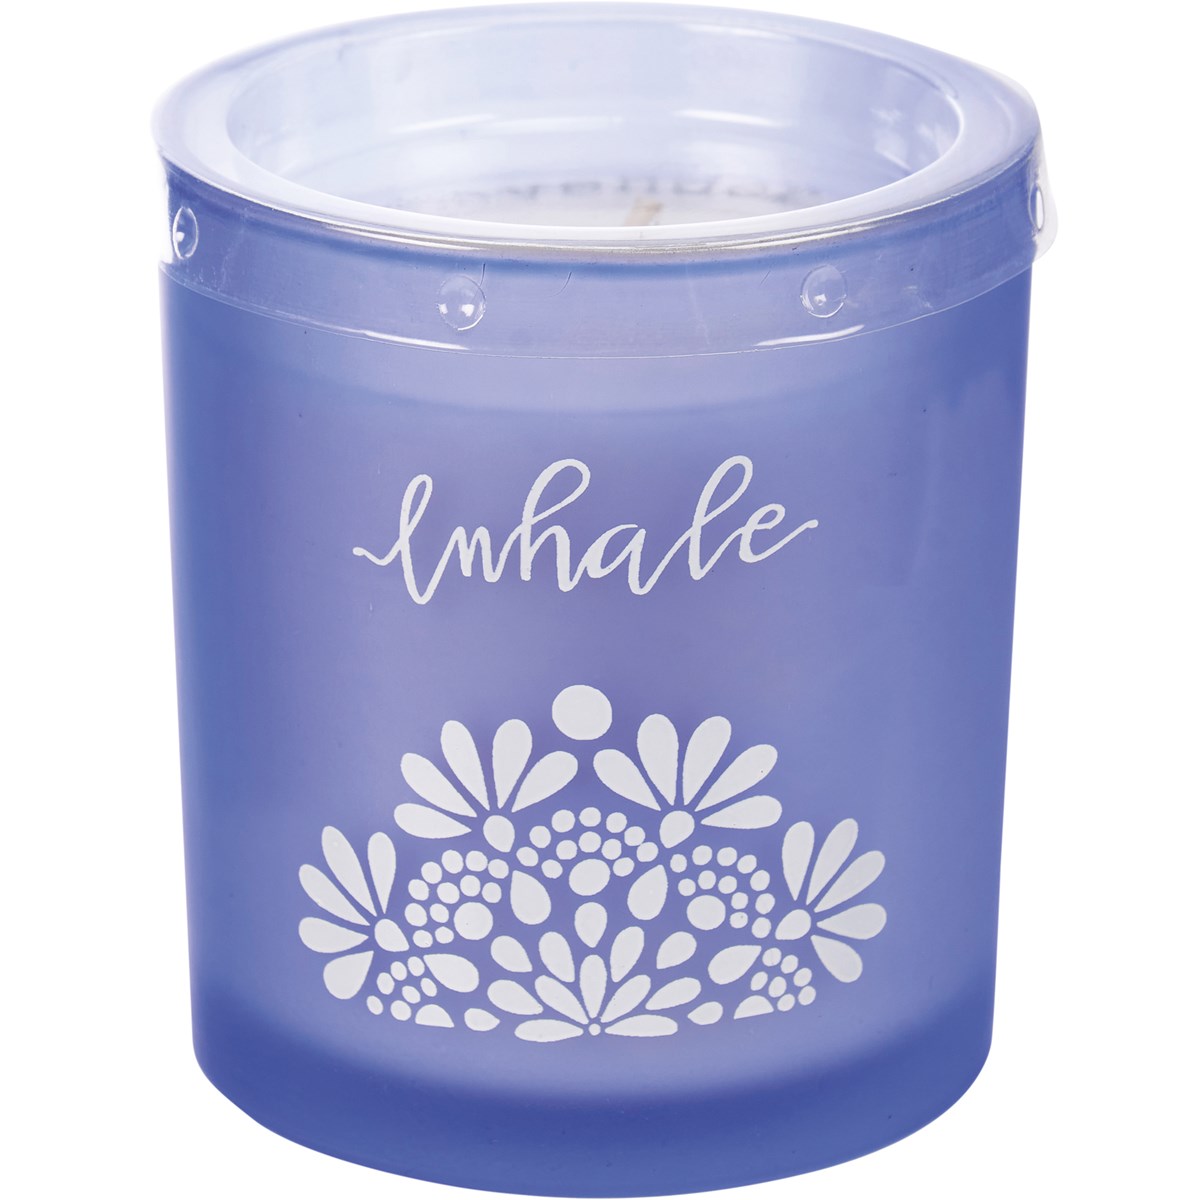 Inhale Jar Candle - Soy Wax, Glass, Cotton